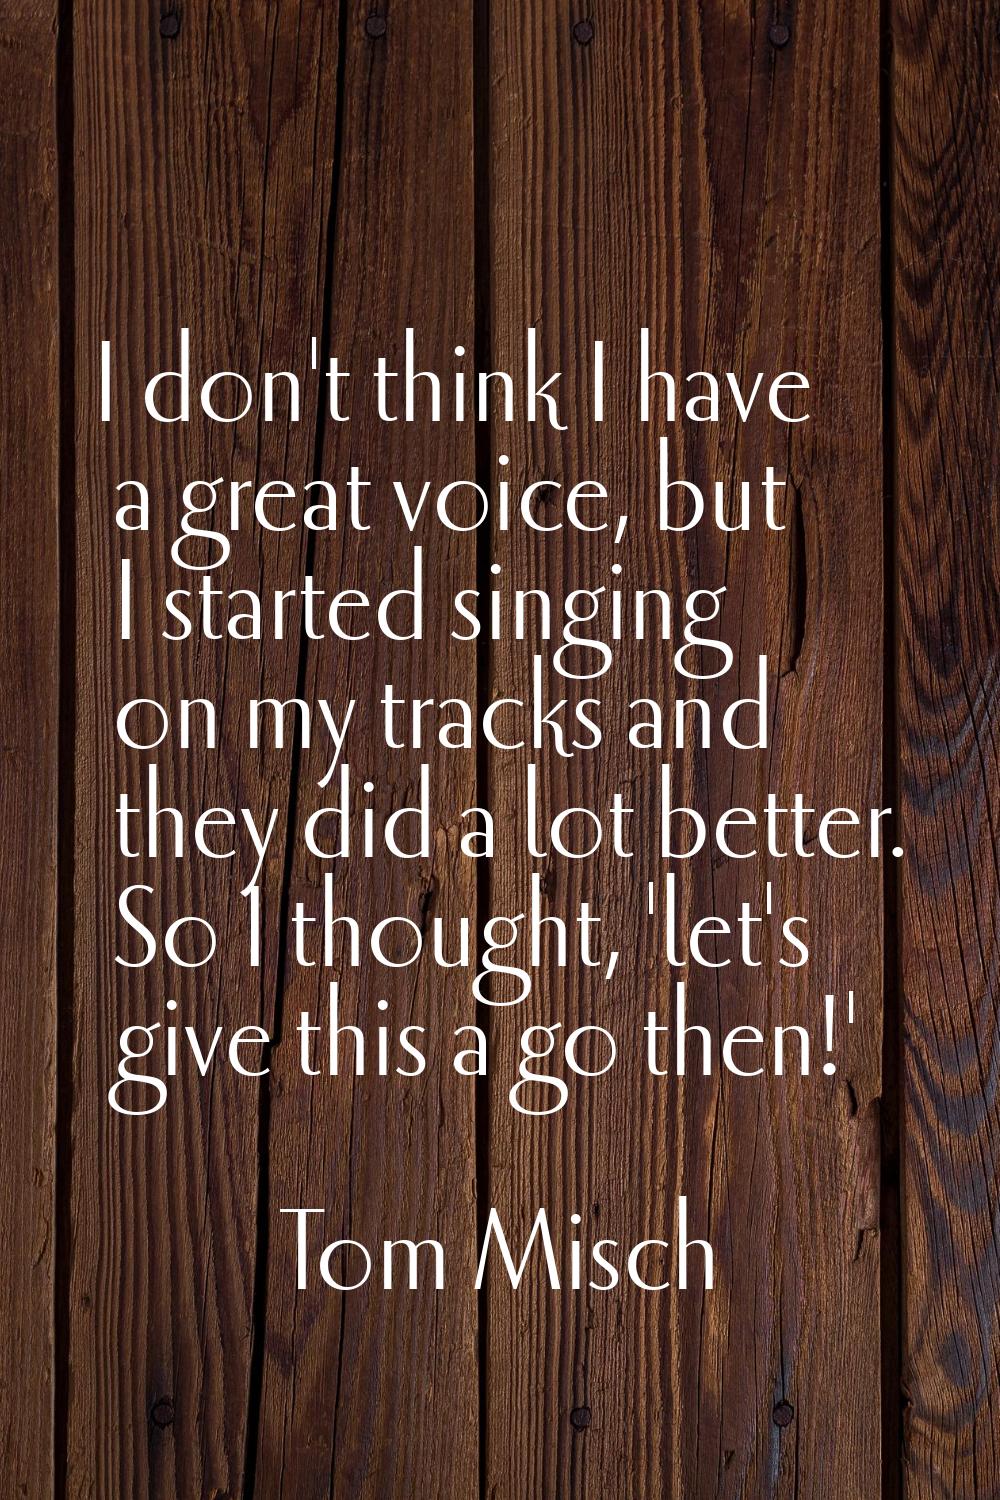 I don't think I have a great voice, but I started singing on my tracks and they did a lot better. S